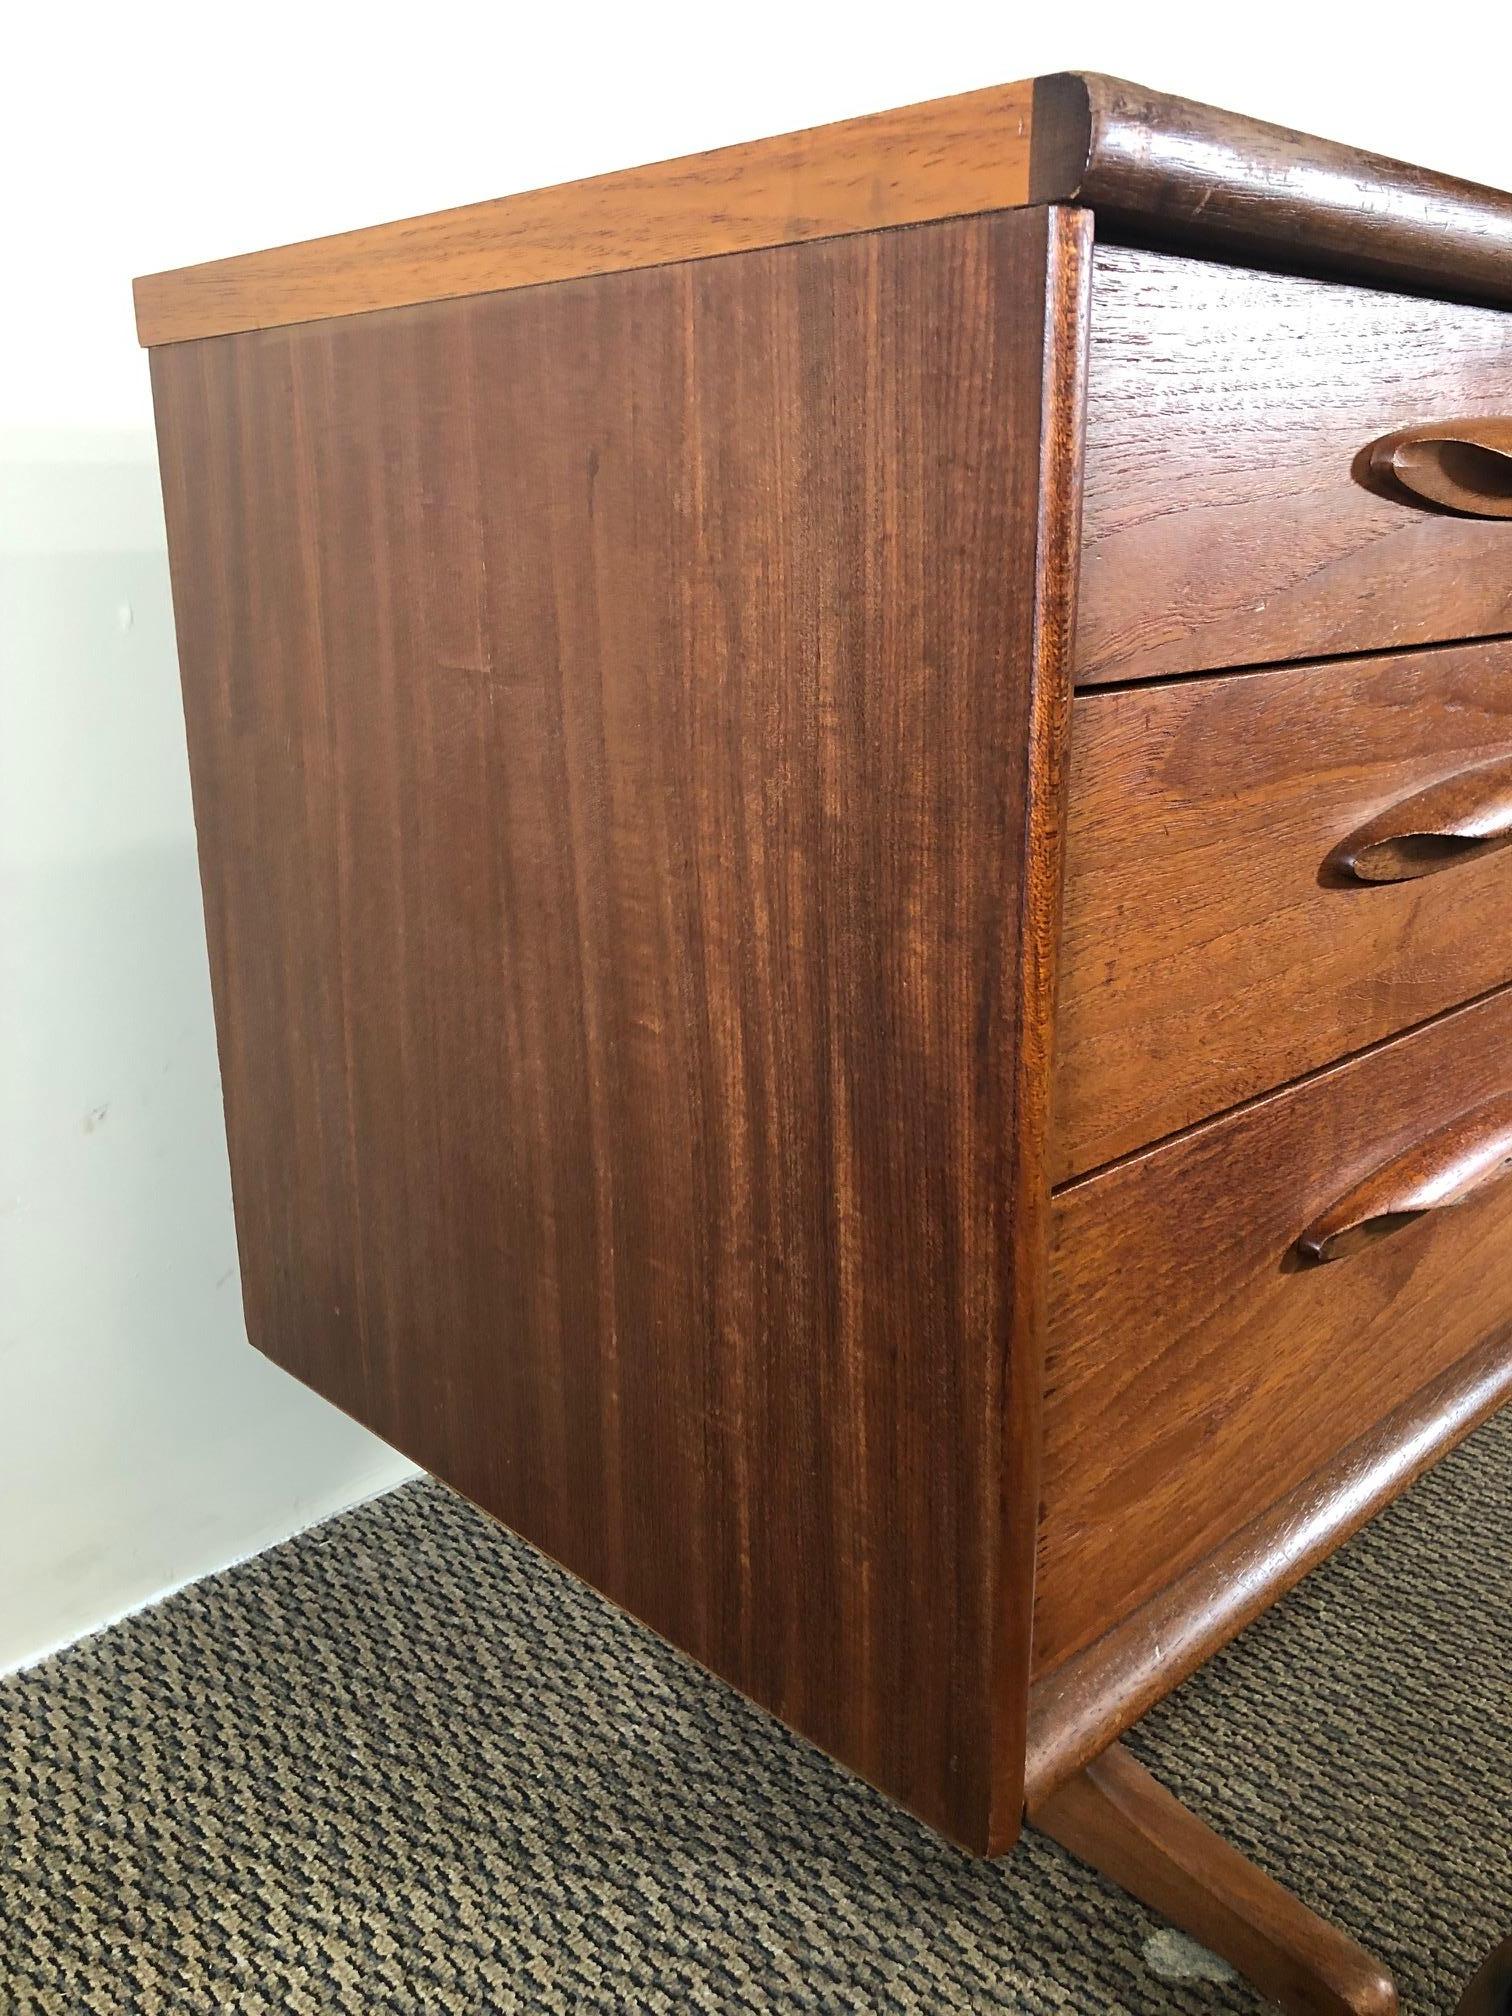 Midcentury Teak Desk or Dressing Table by Austinsuite In Good Condition For Sale In Norcross, GA